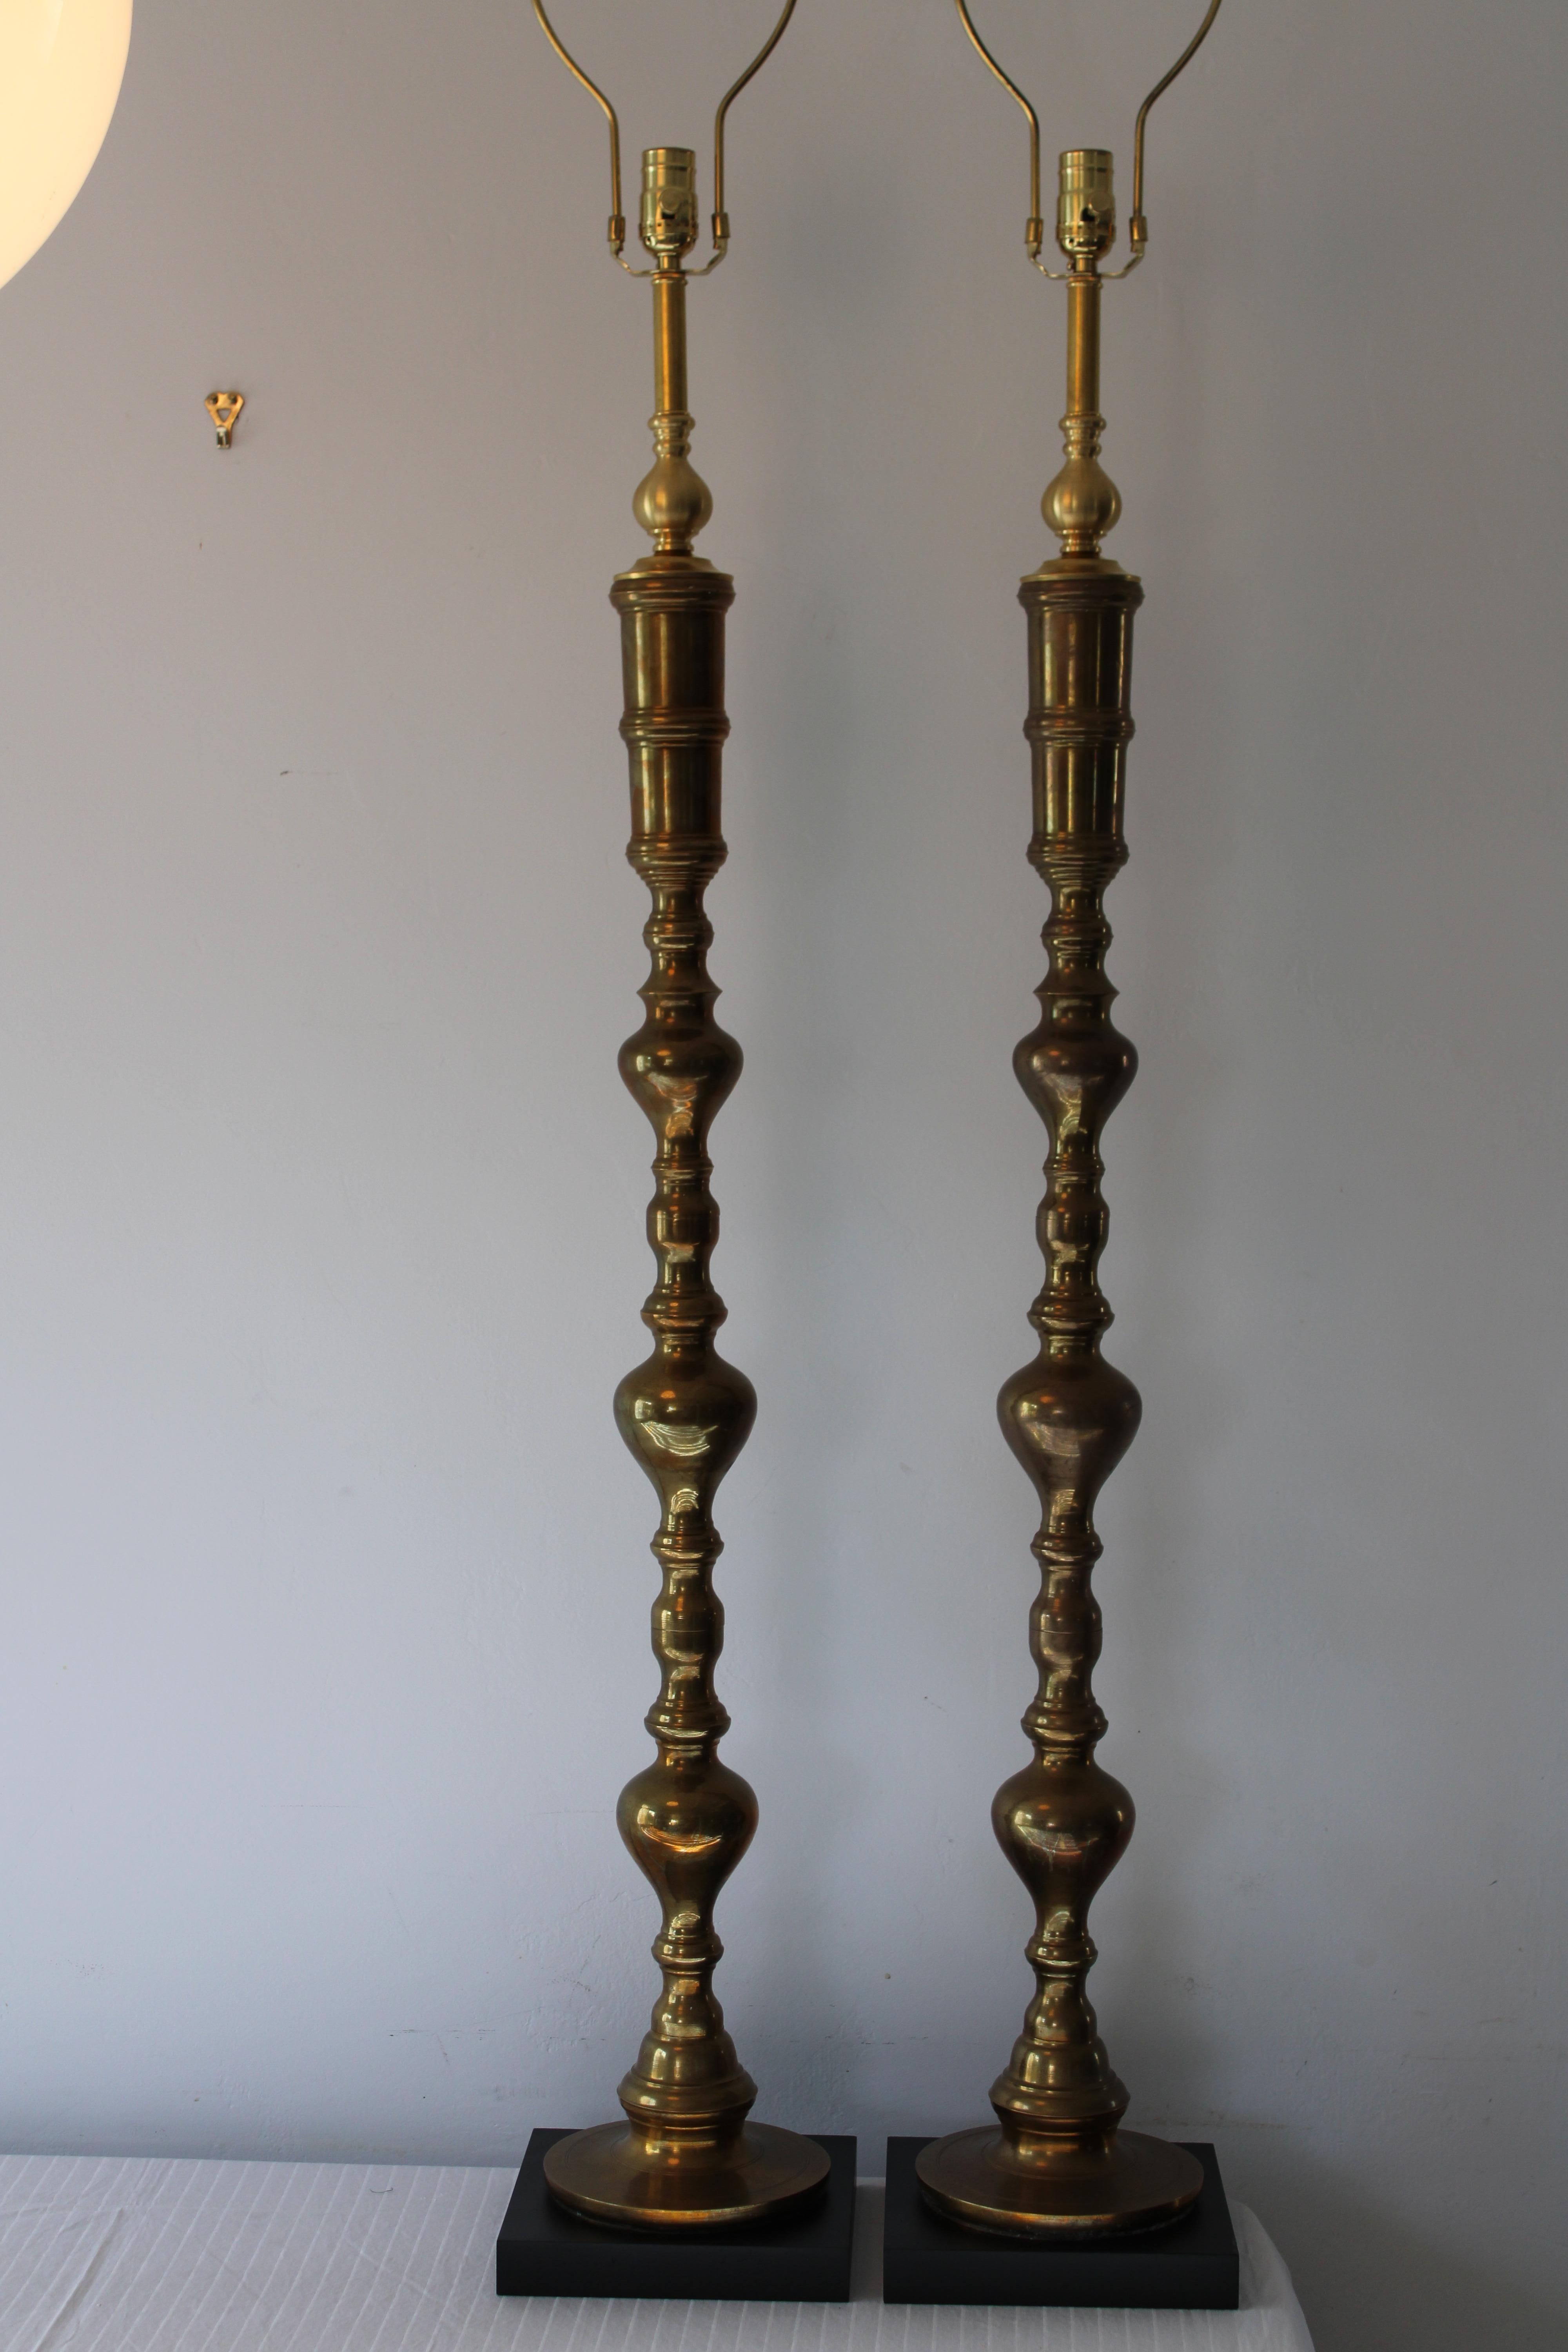 A matched pair of tall solid brass lamps with black painted wood bases. We took a pair of brass candlesticks and modified them to produce an elegant pair of brass lamps. Lamps measure 46.5